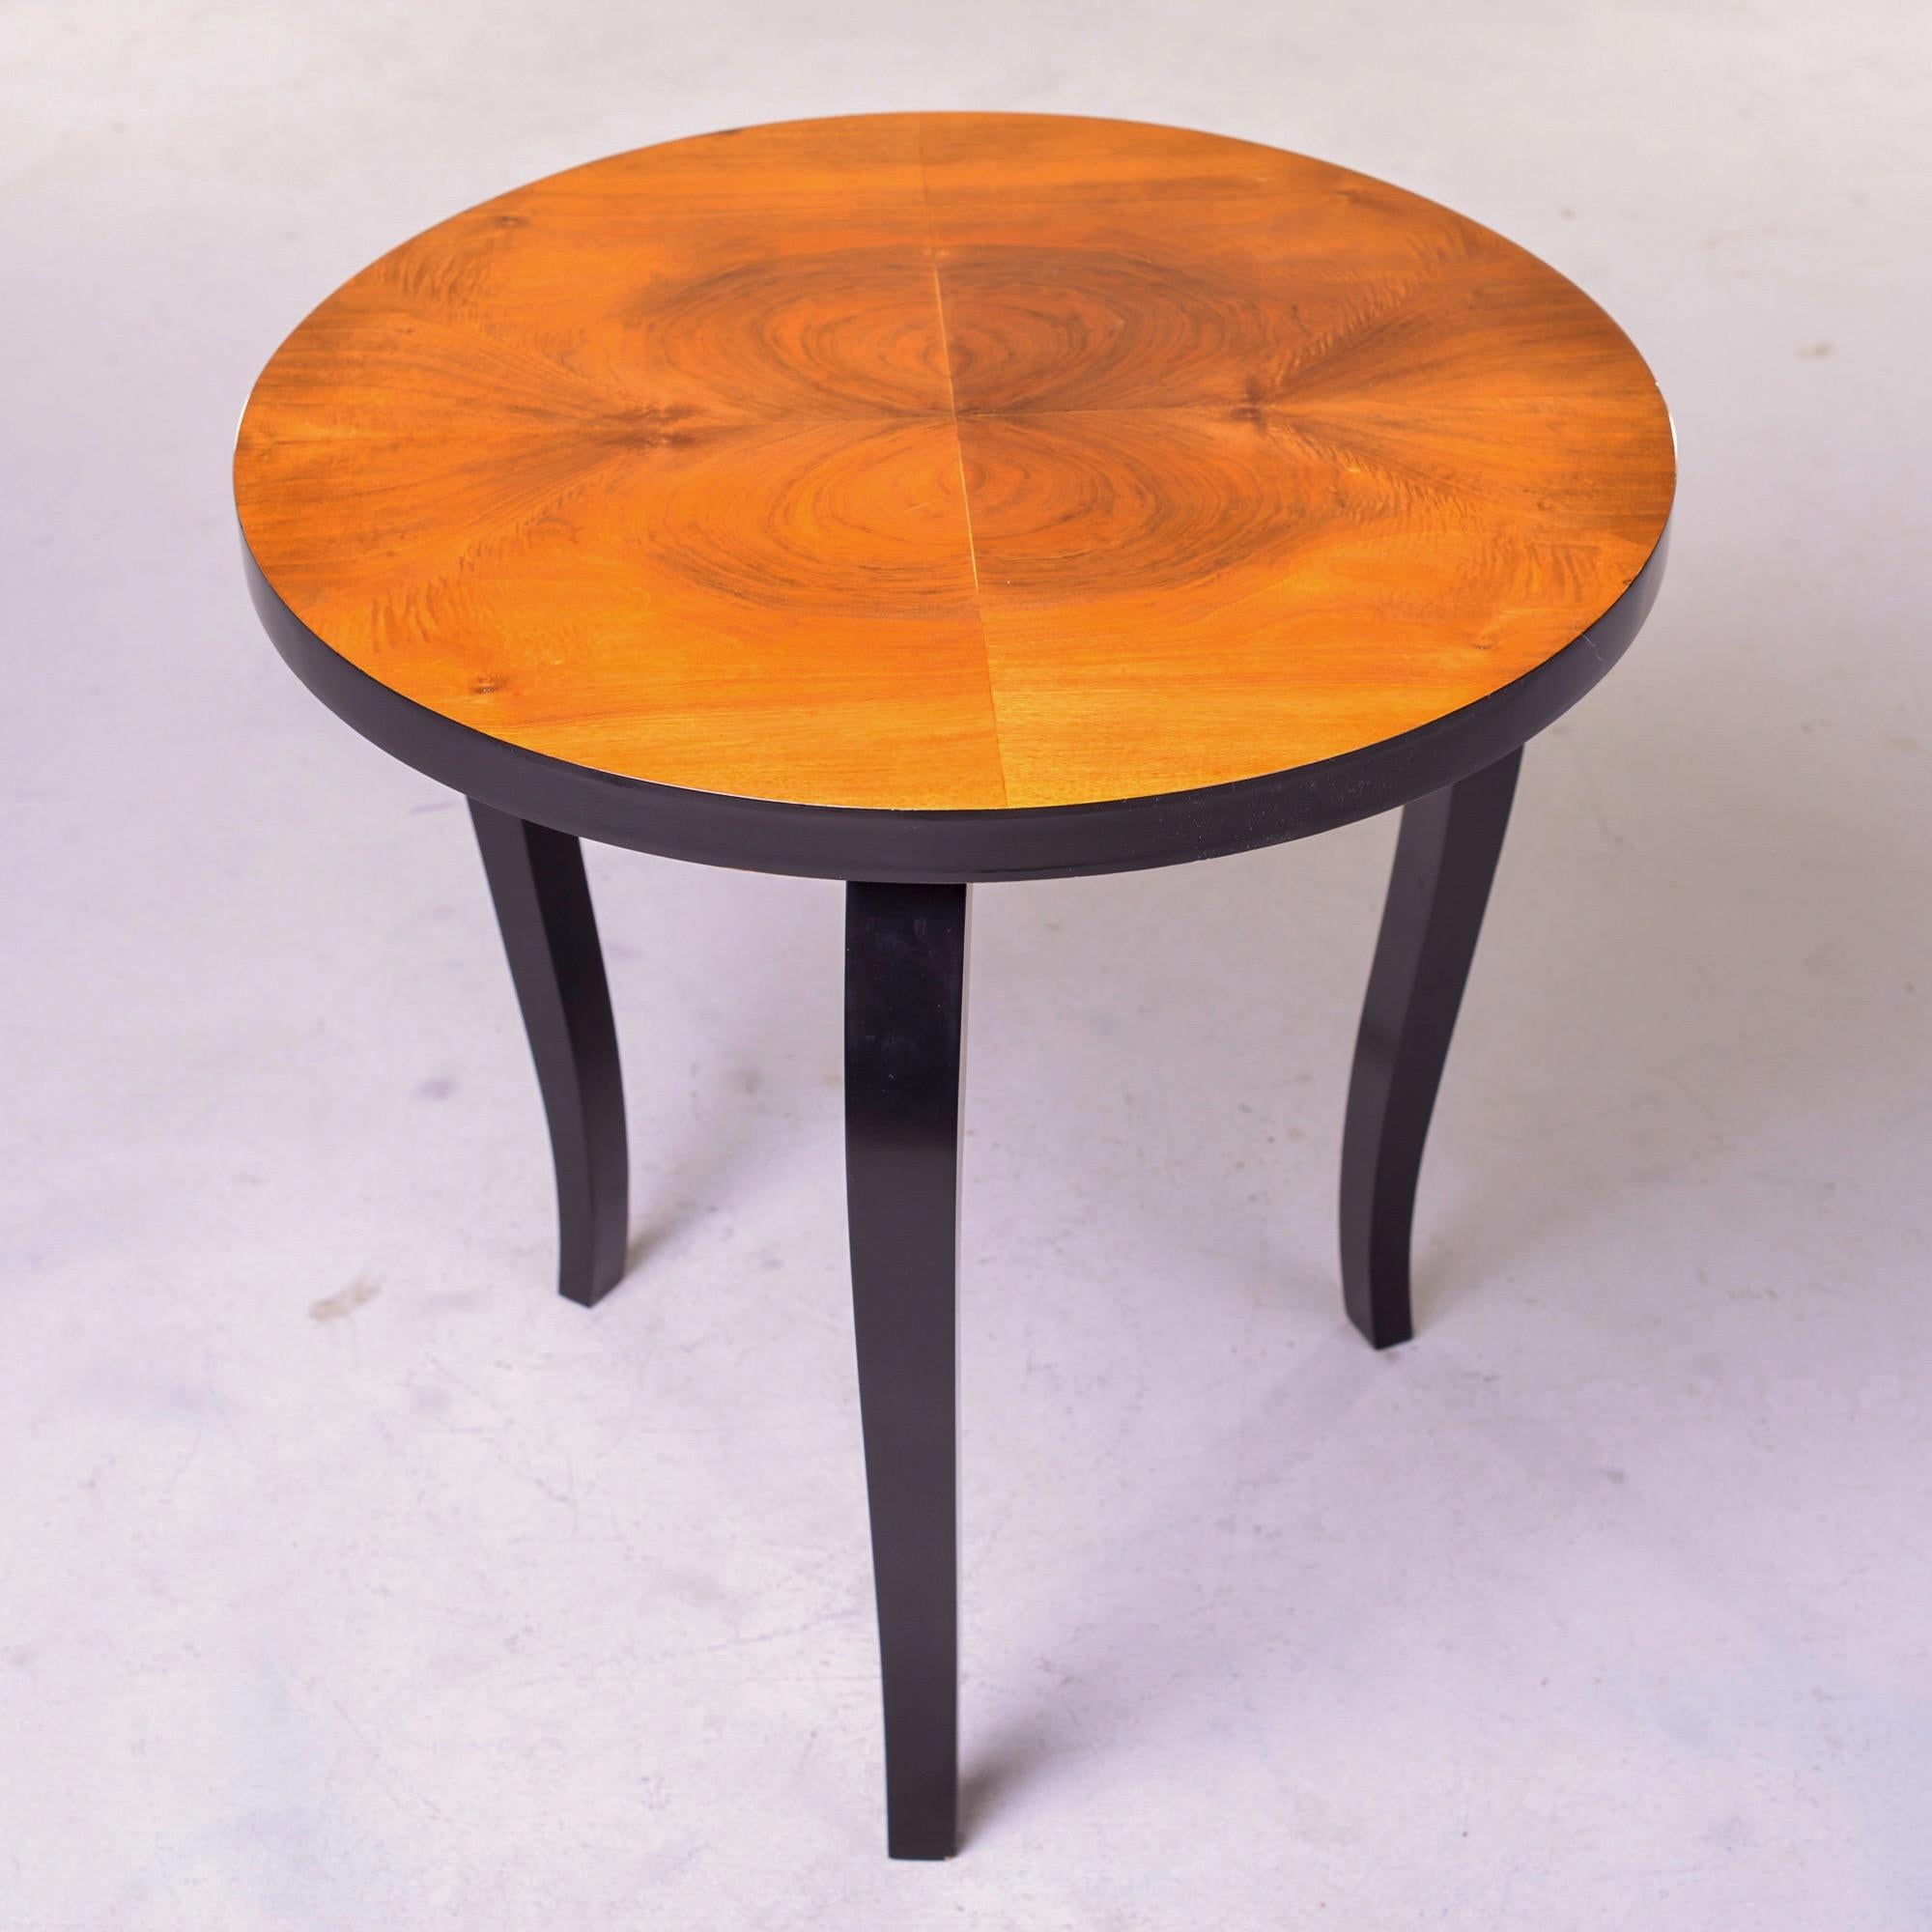 Circa 1930s round French side table in a burled walnut veneer with contrasting black stained legs and edge. Unknown maker. Very good vintage condition.